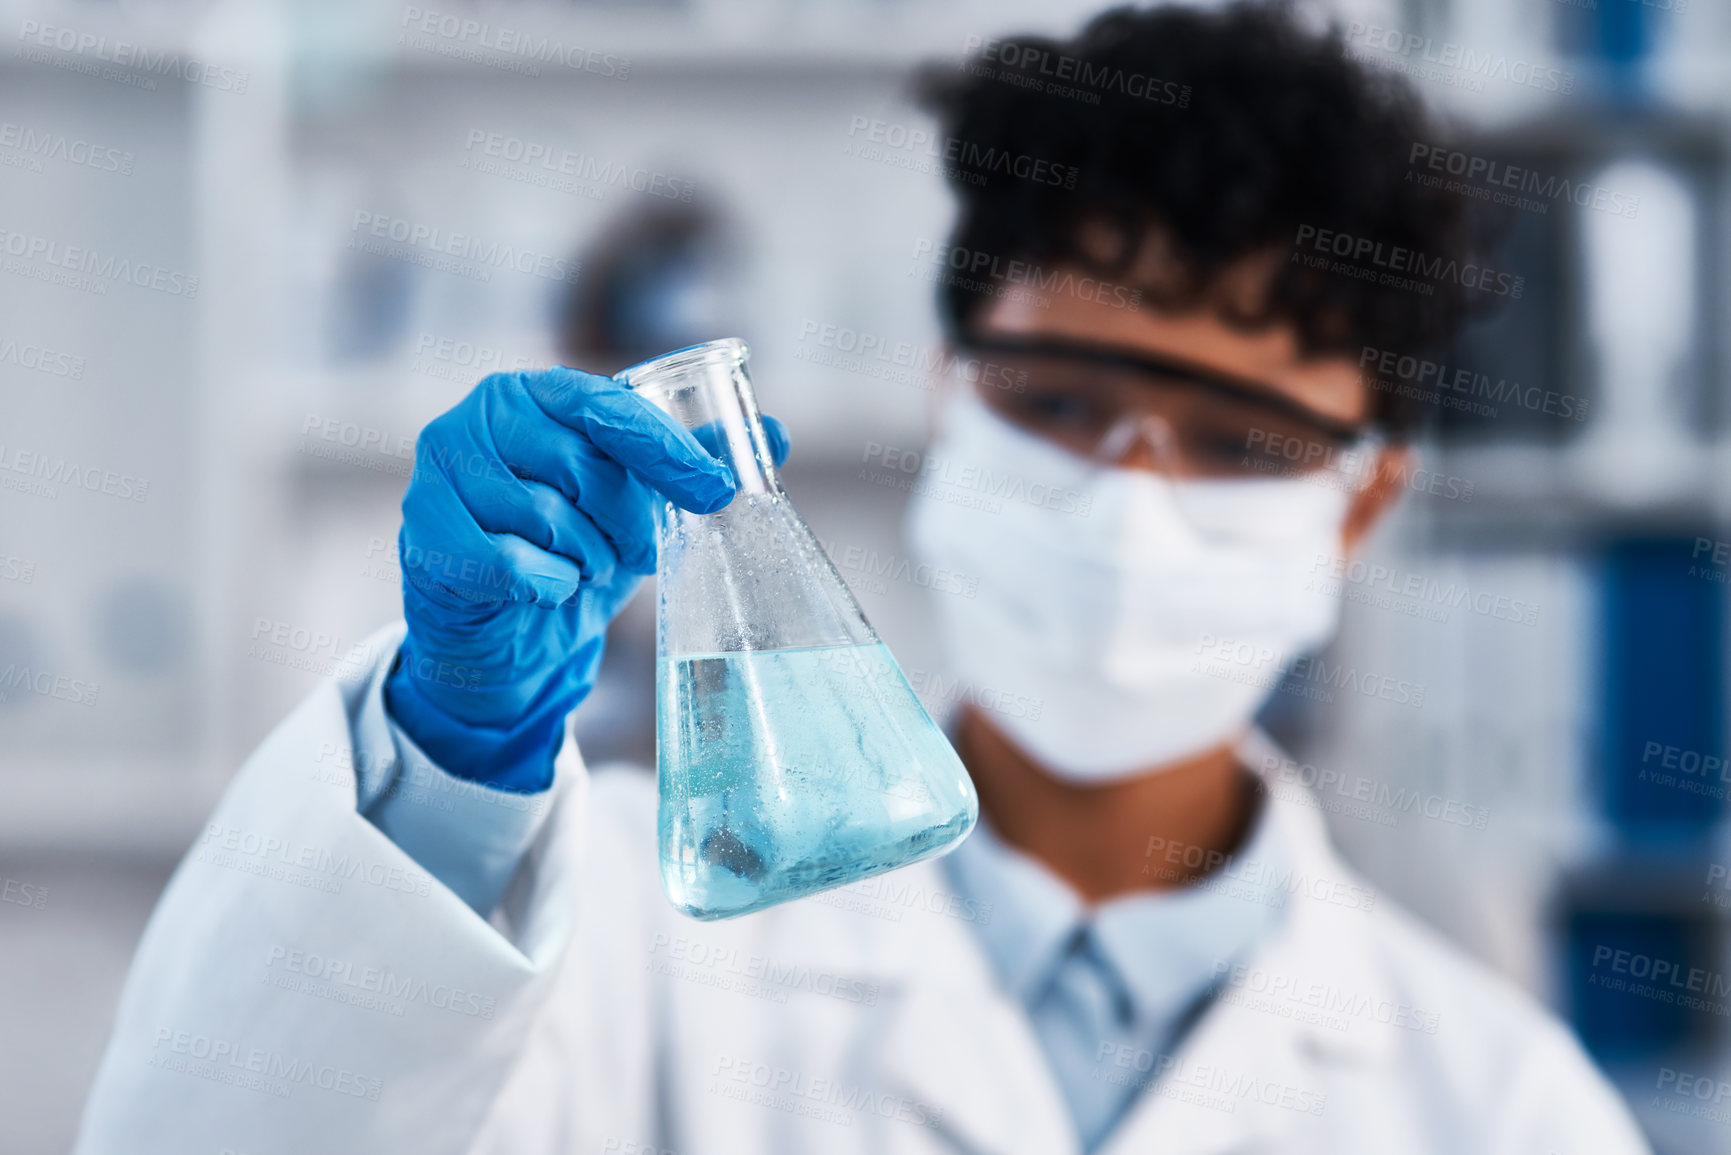 Buy stock photo Closeup shot of a young scientist holding a beaker in a lab